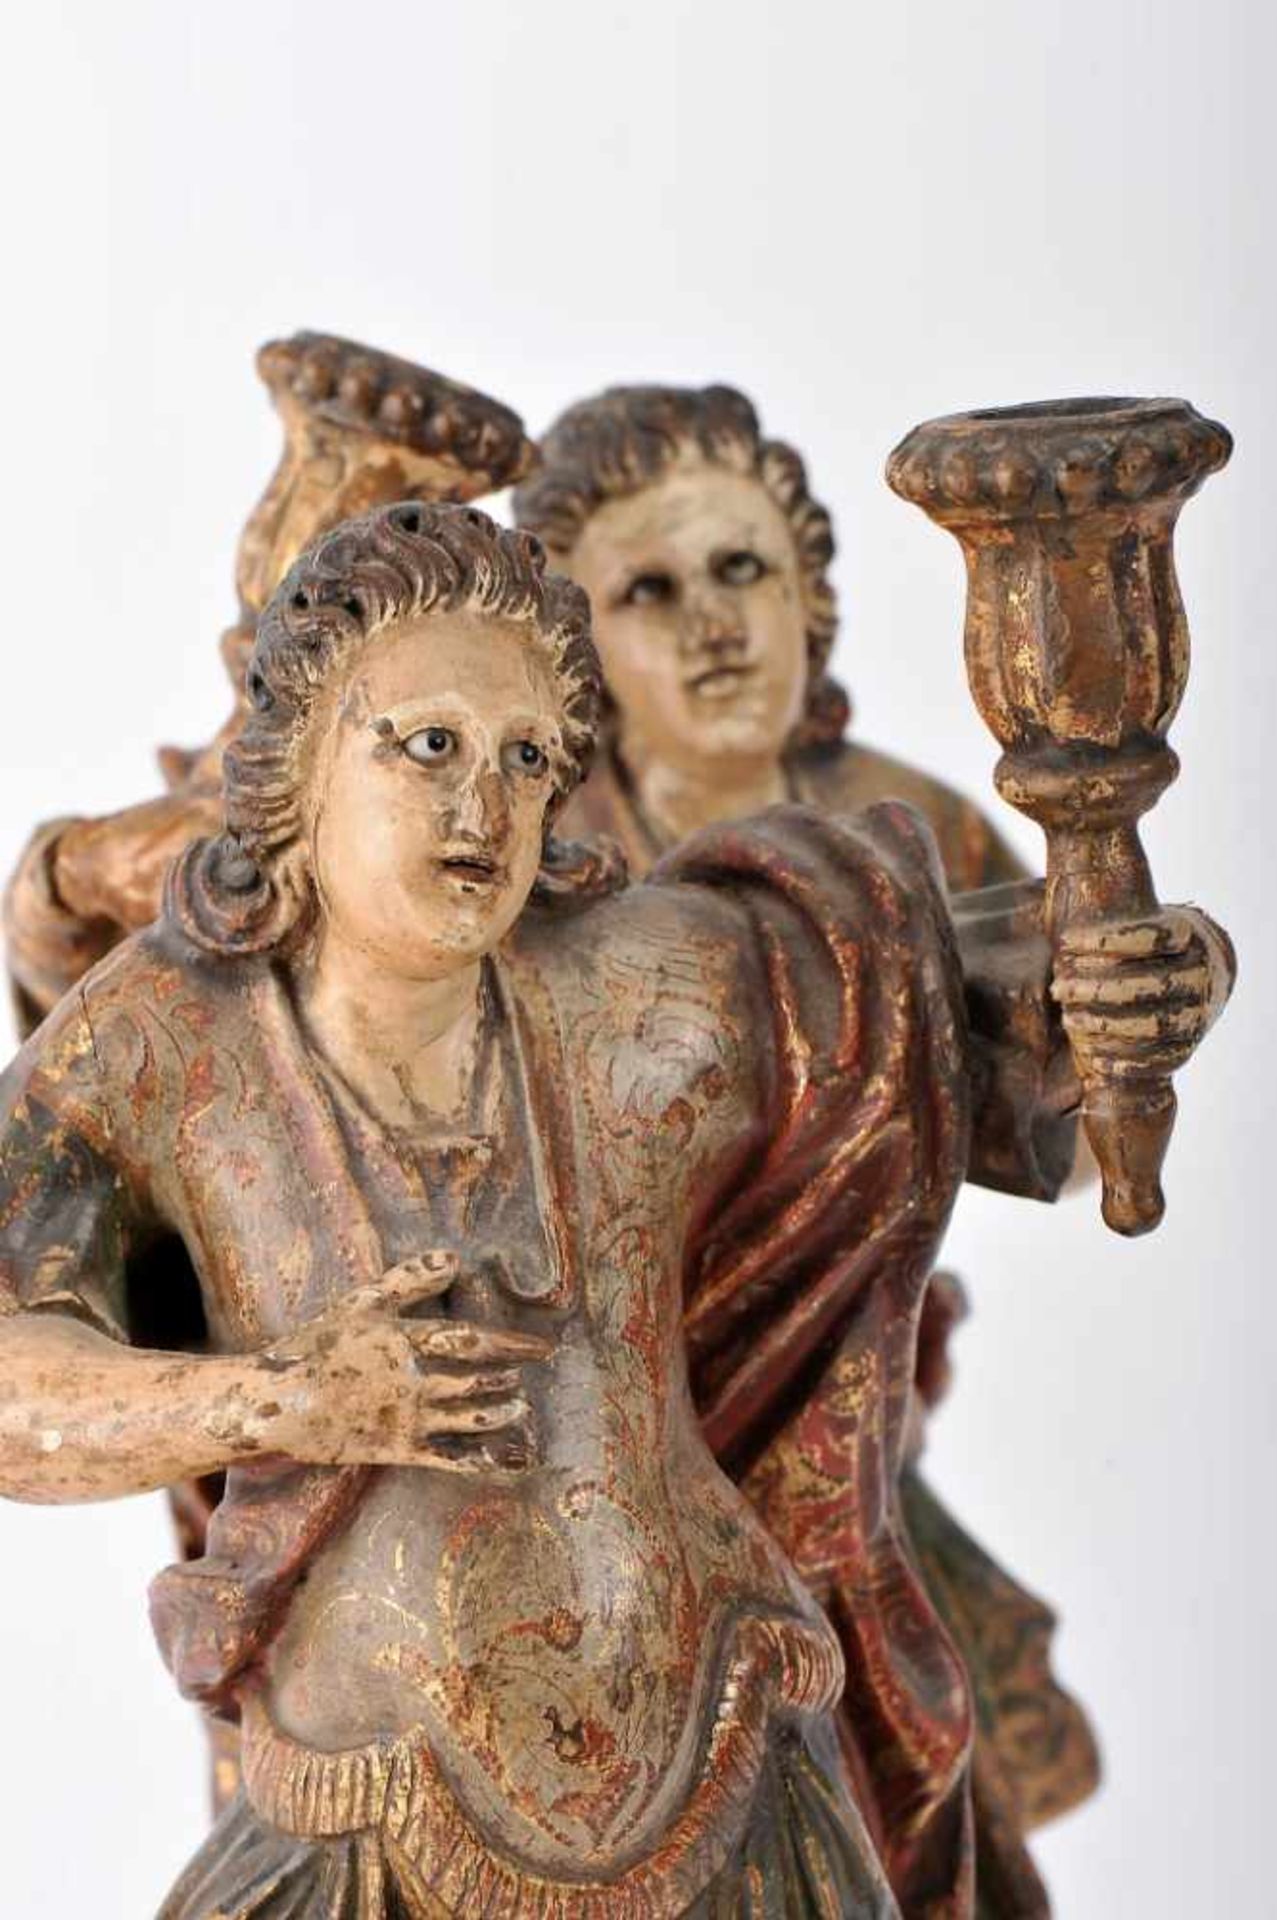 Candle-Bearing SeraphsCandle-Bearing Seraphs, a pair of wood sculptures, polychrome and gilt - Image 2 of 3